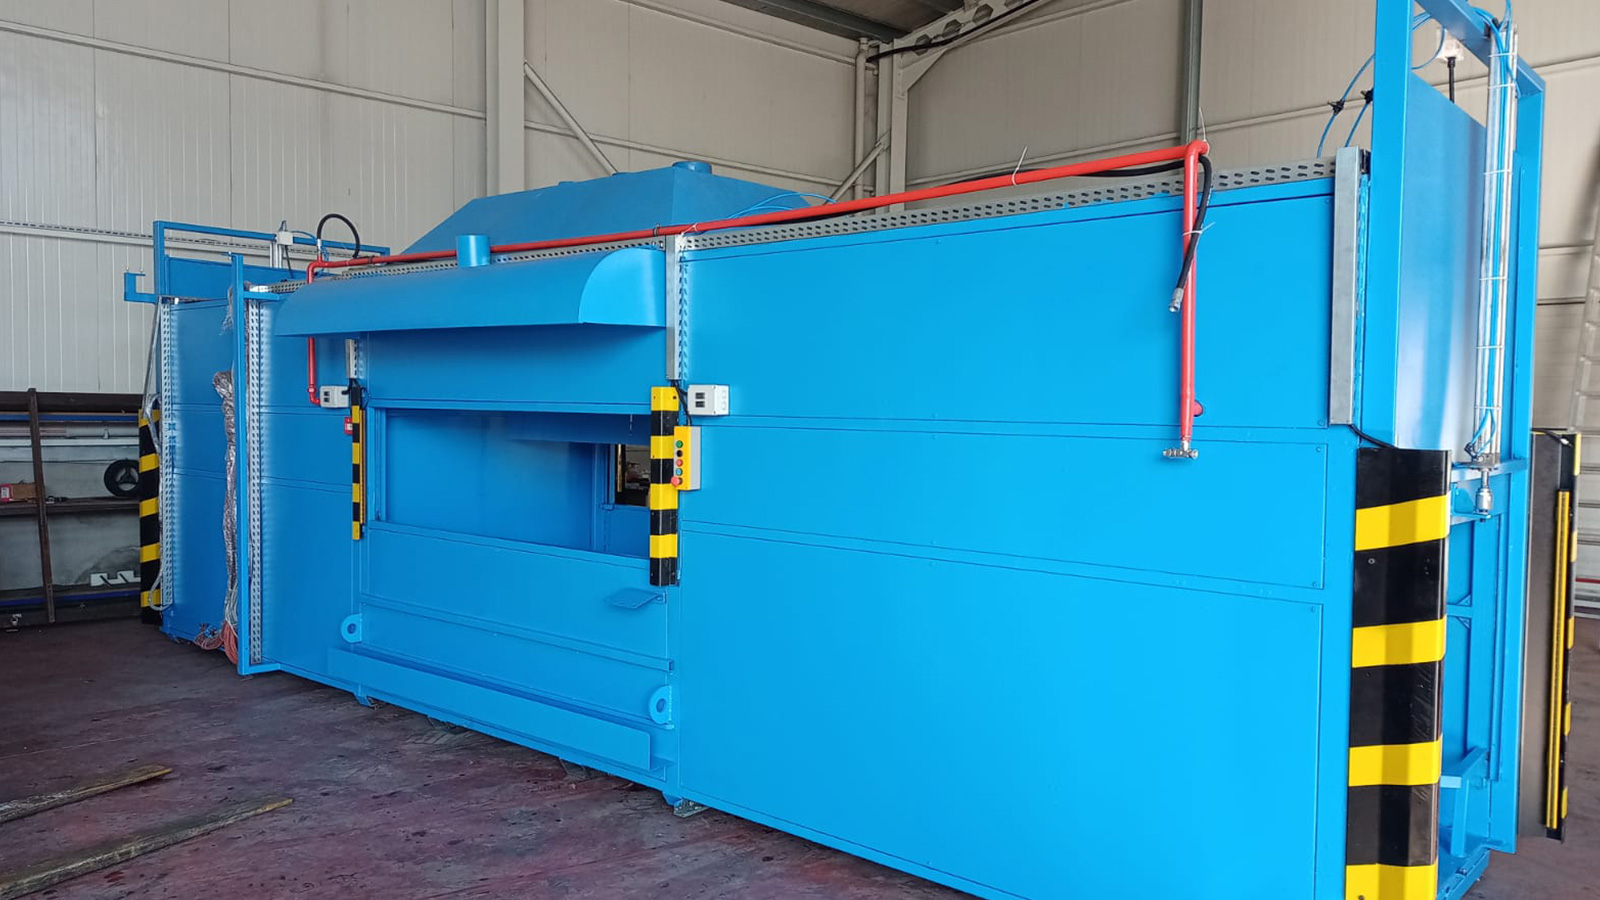 PAINTING AND SILICONE COATING MACHINERY